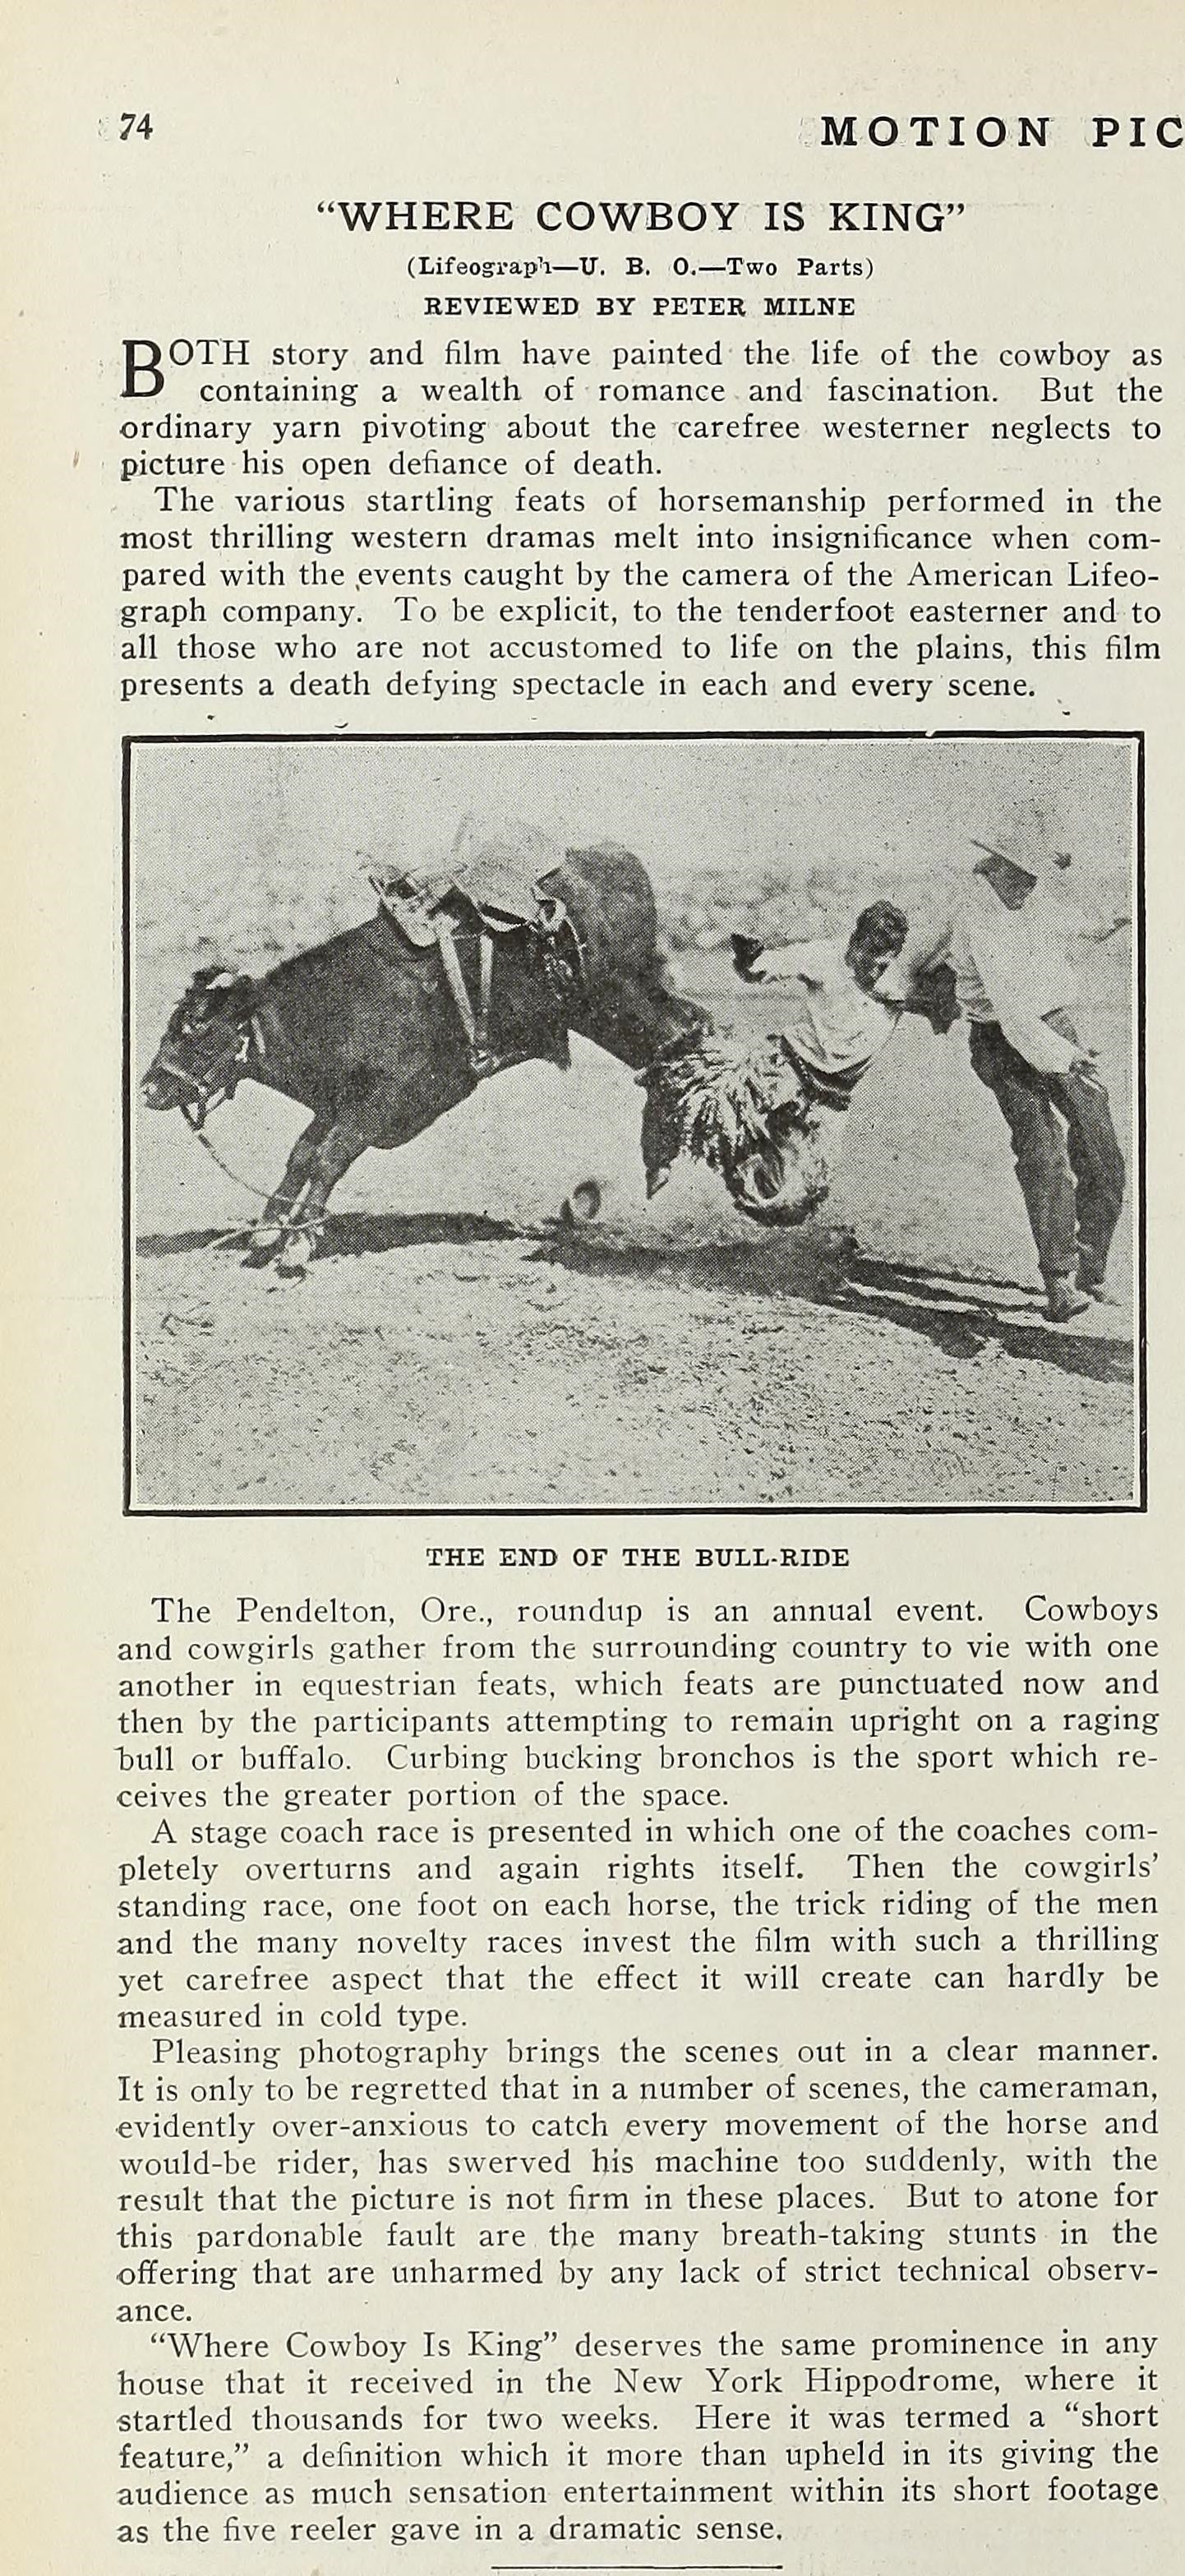 Motion Picture News, Apr. 13, 1915 p.74 Media History Digital Library